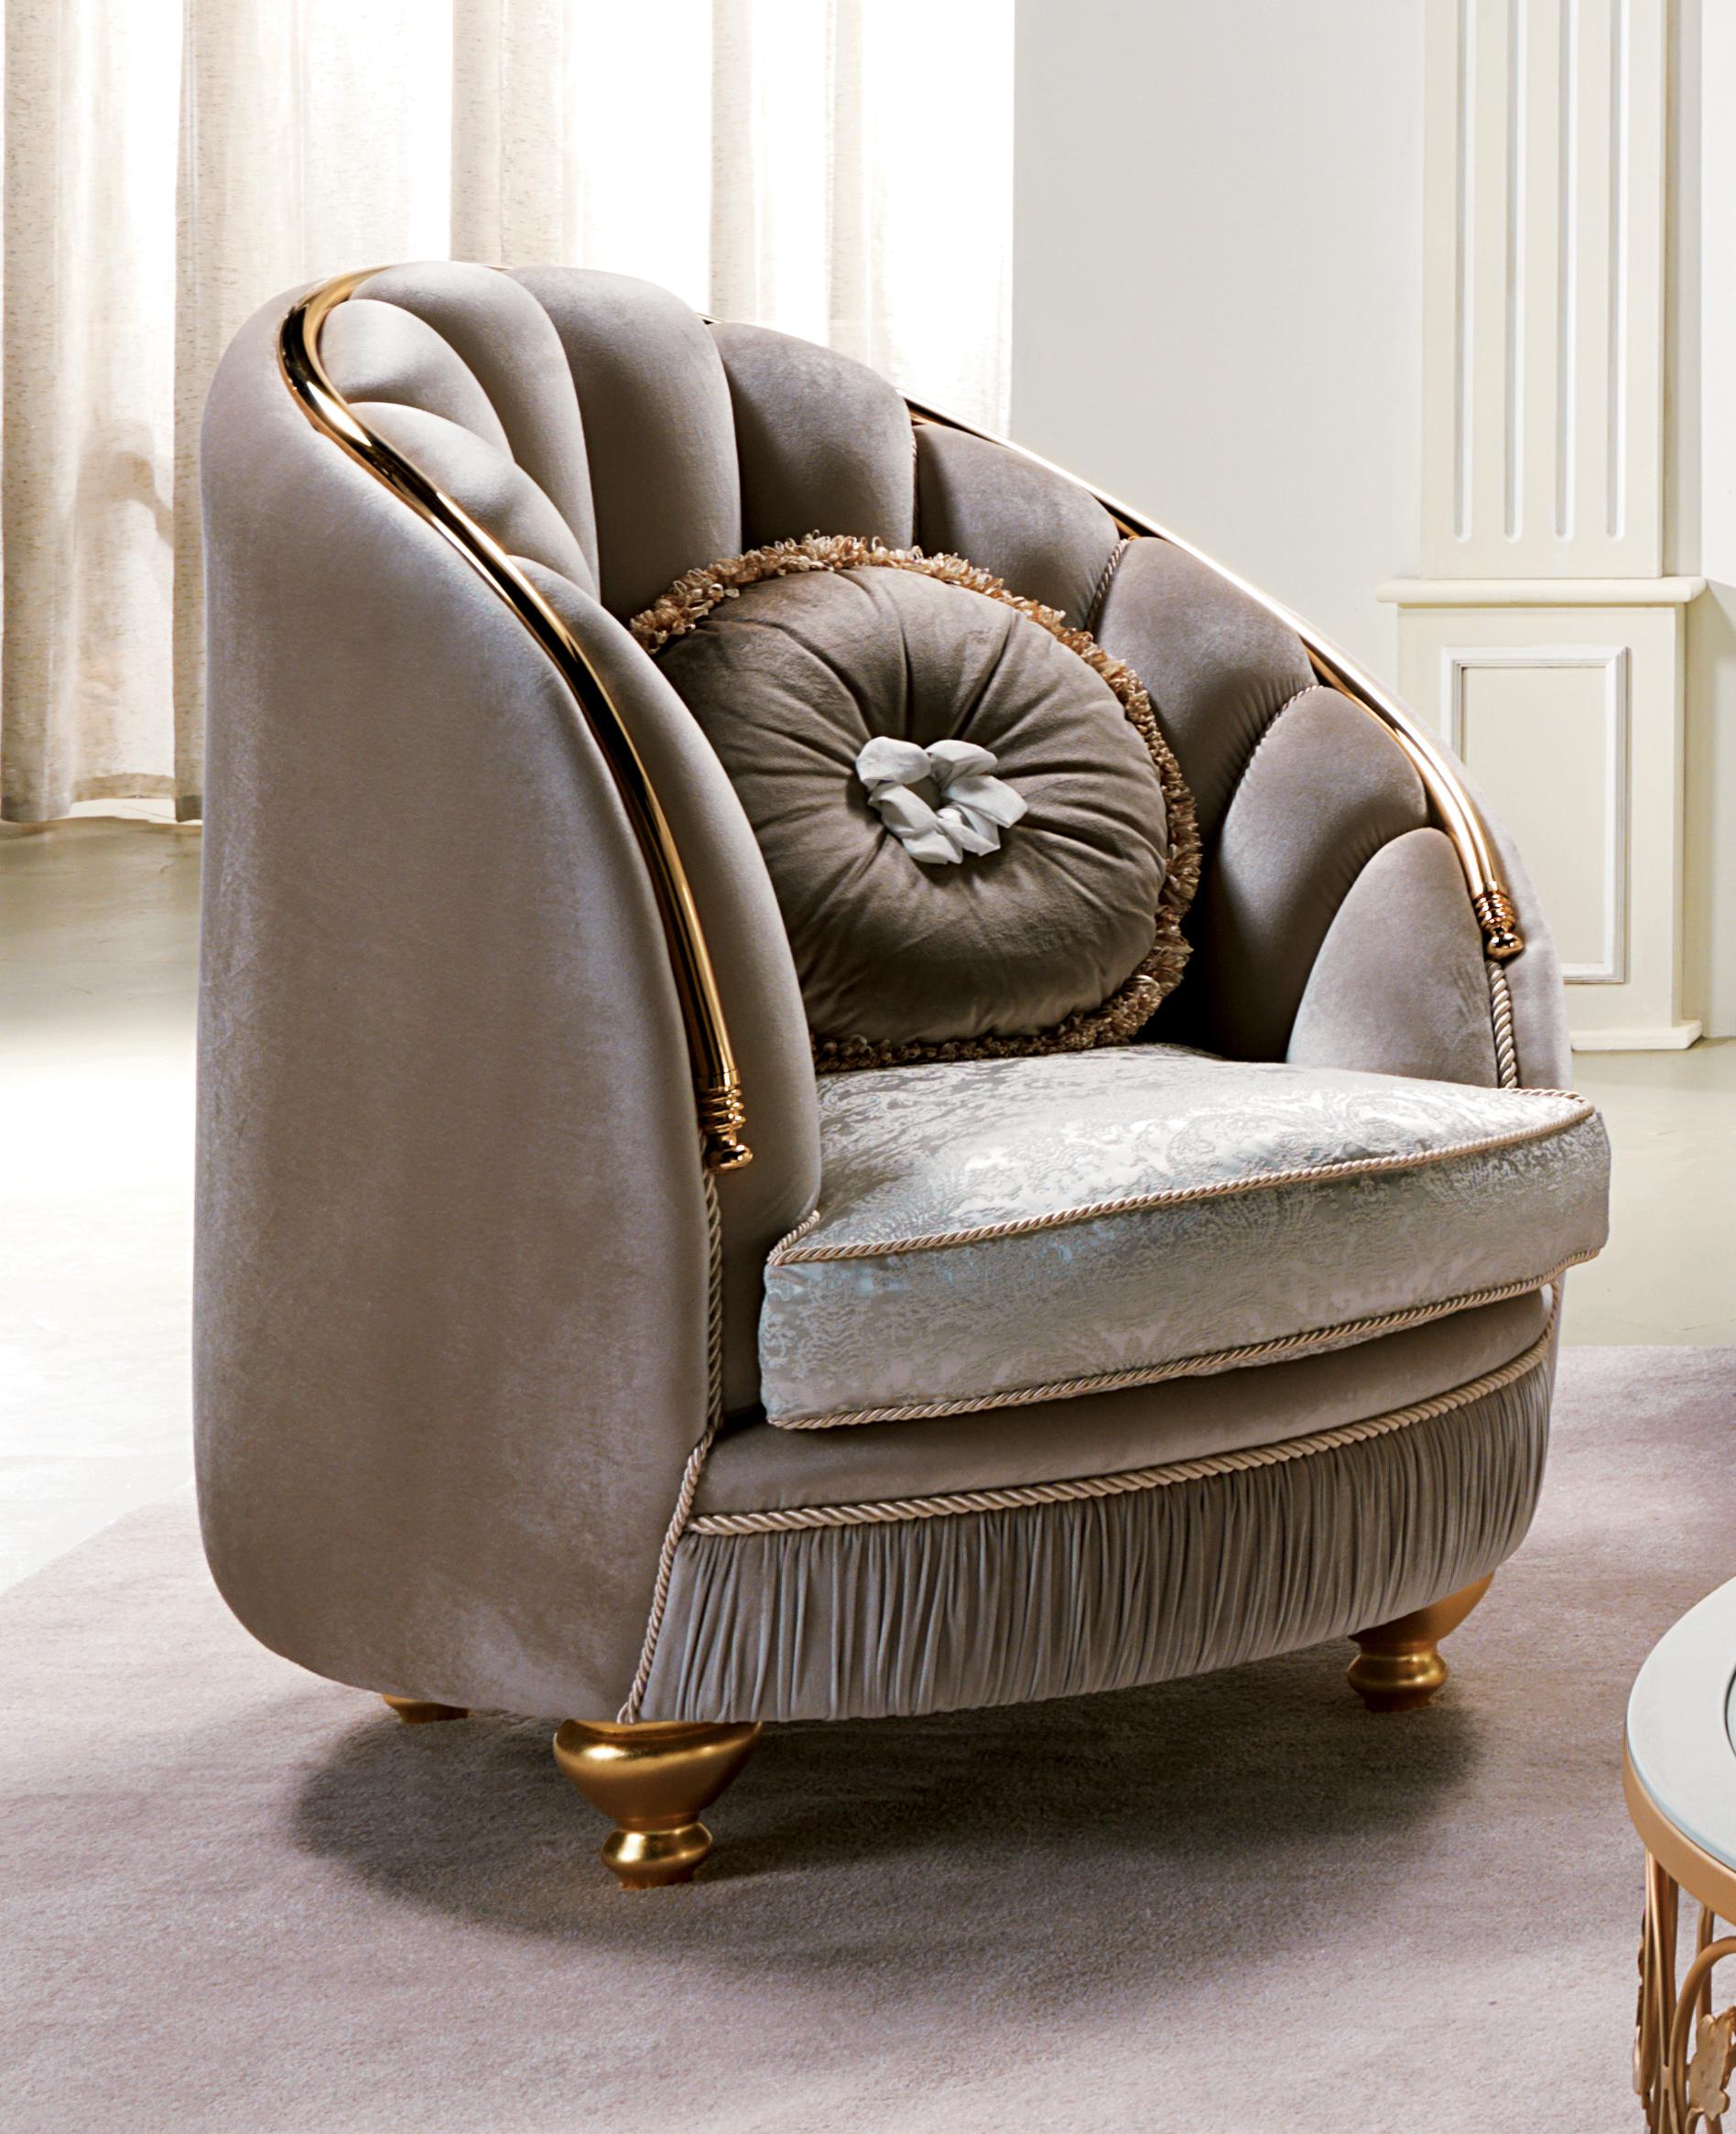 The AQ031 armchair skillfully combines fine materials and high-quality craftsmanship to create an unparalleled visual and seating experience.

The distinguishing feature of this armchair is the presence of wrought iron foliate decorations,